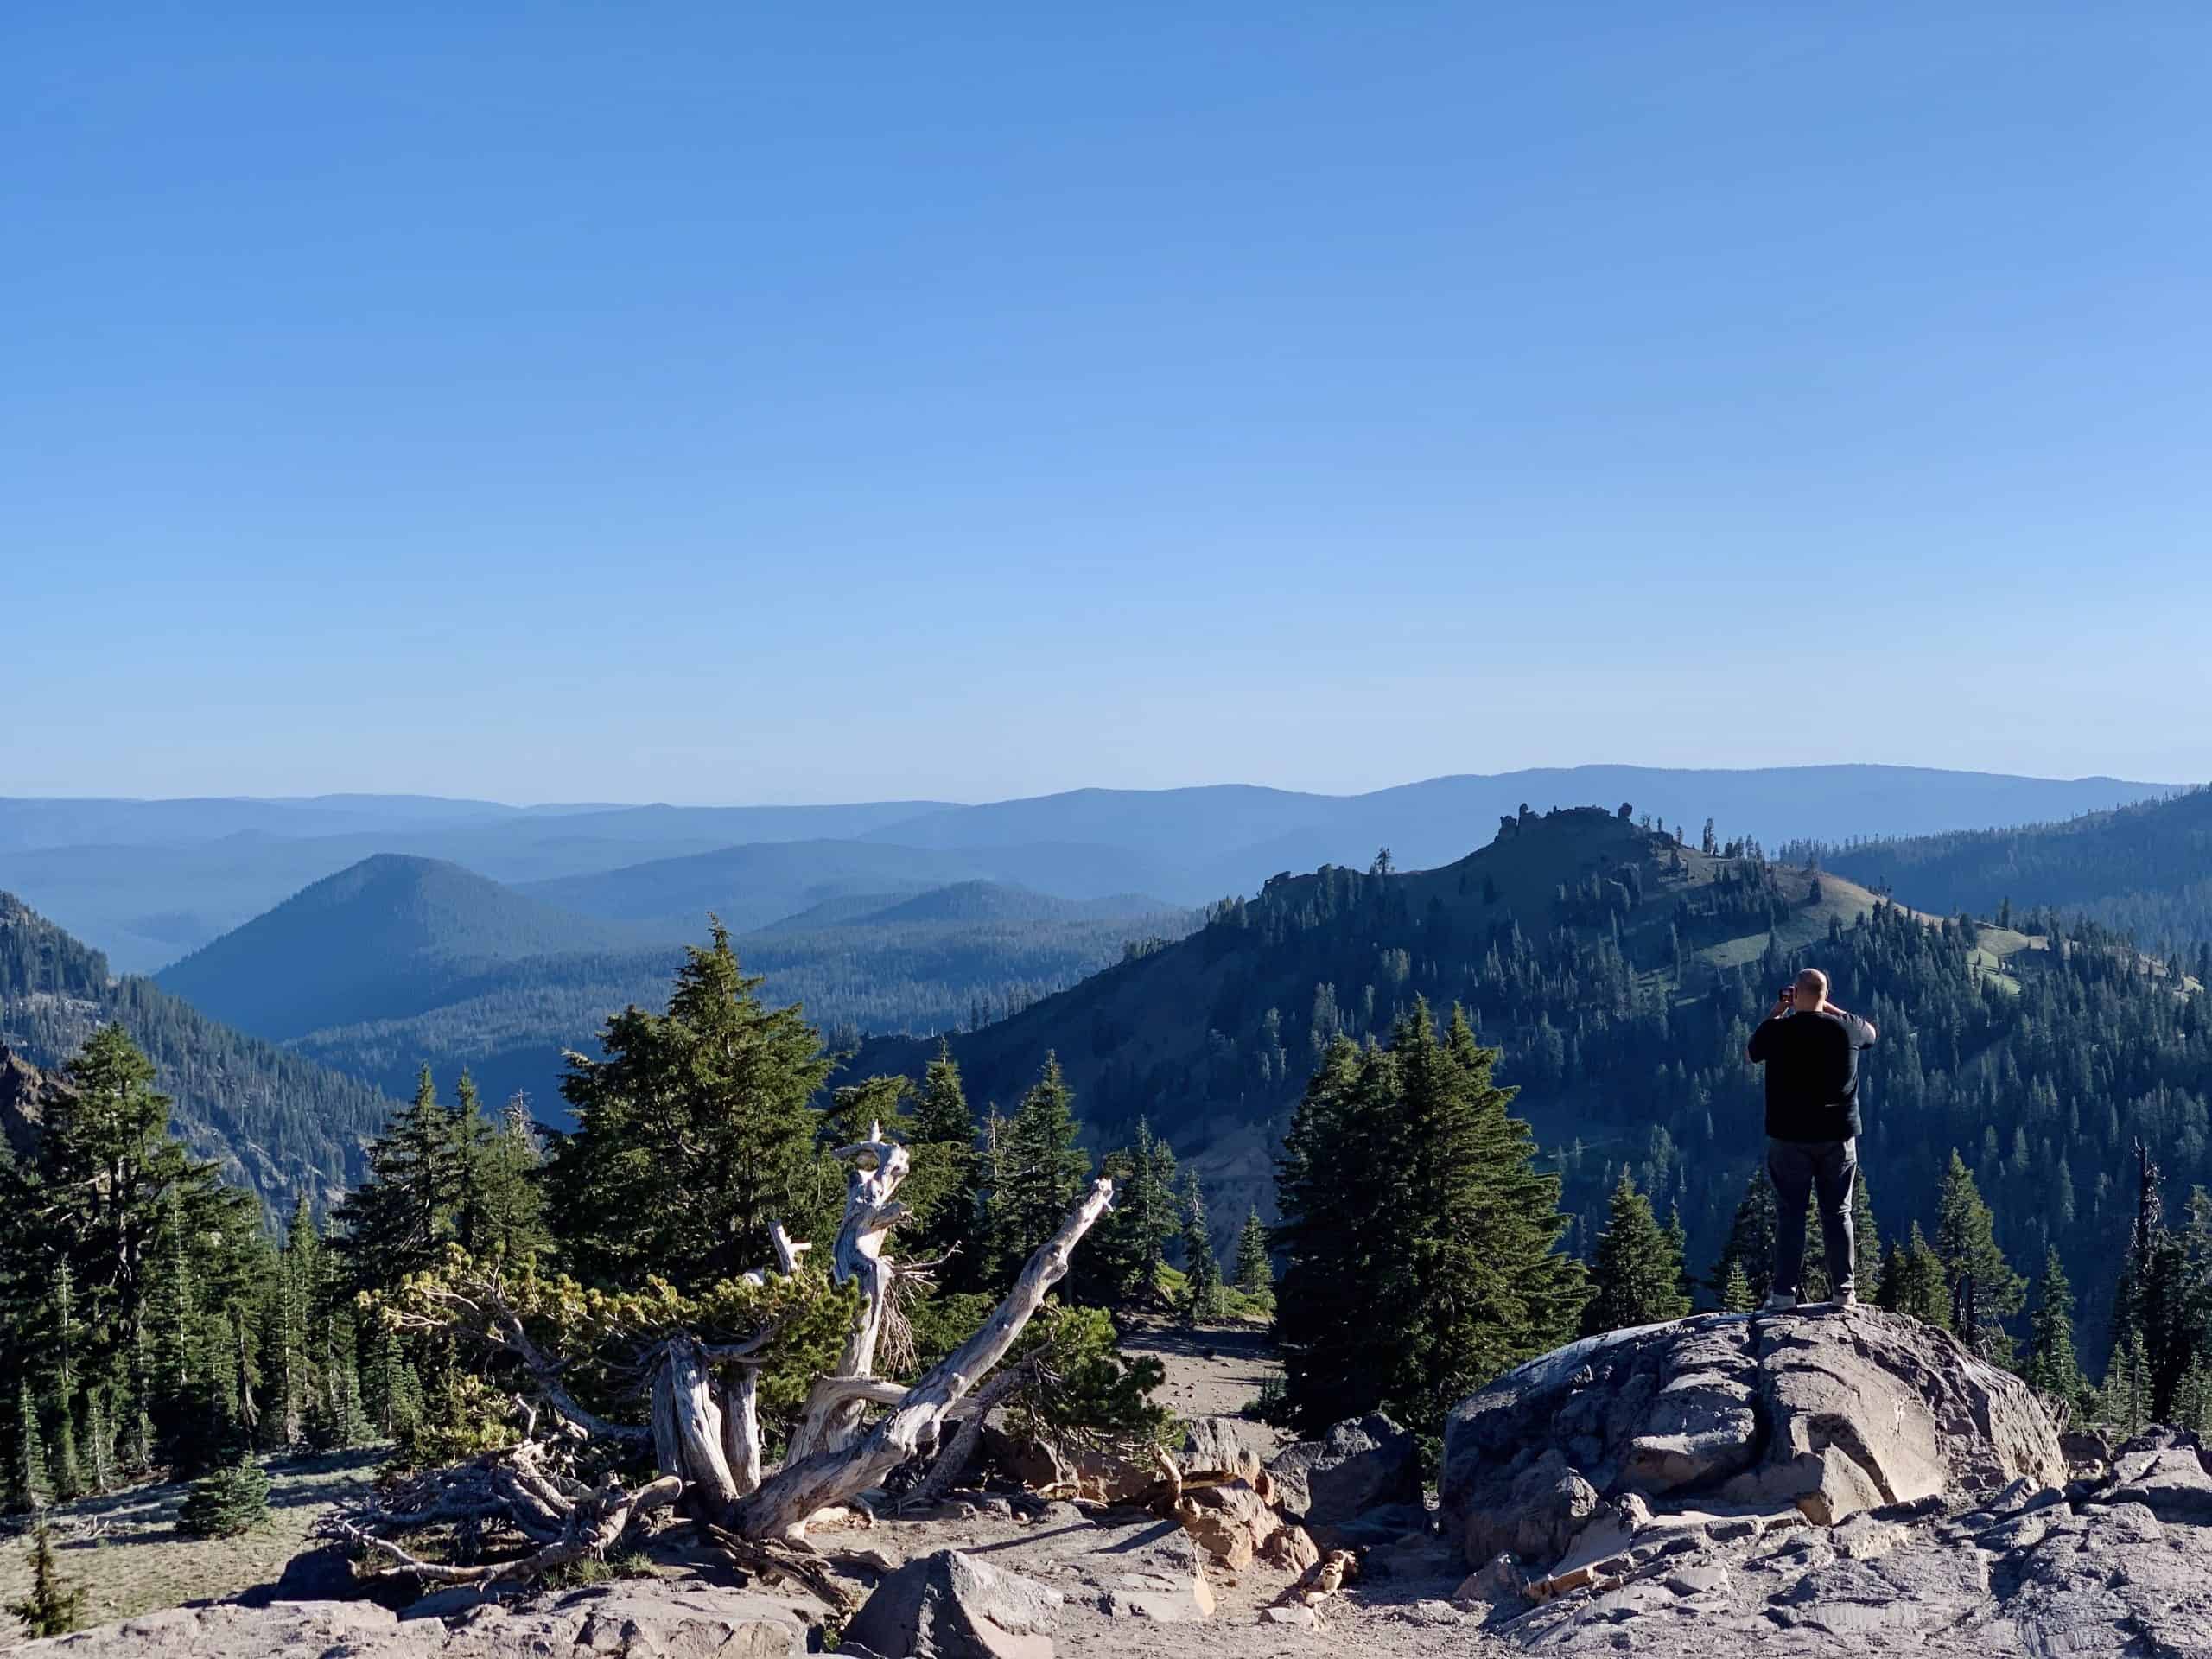 Panoramic view of the peaks in the Lassen Volcanic Park.